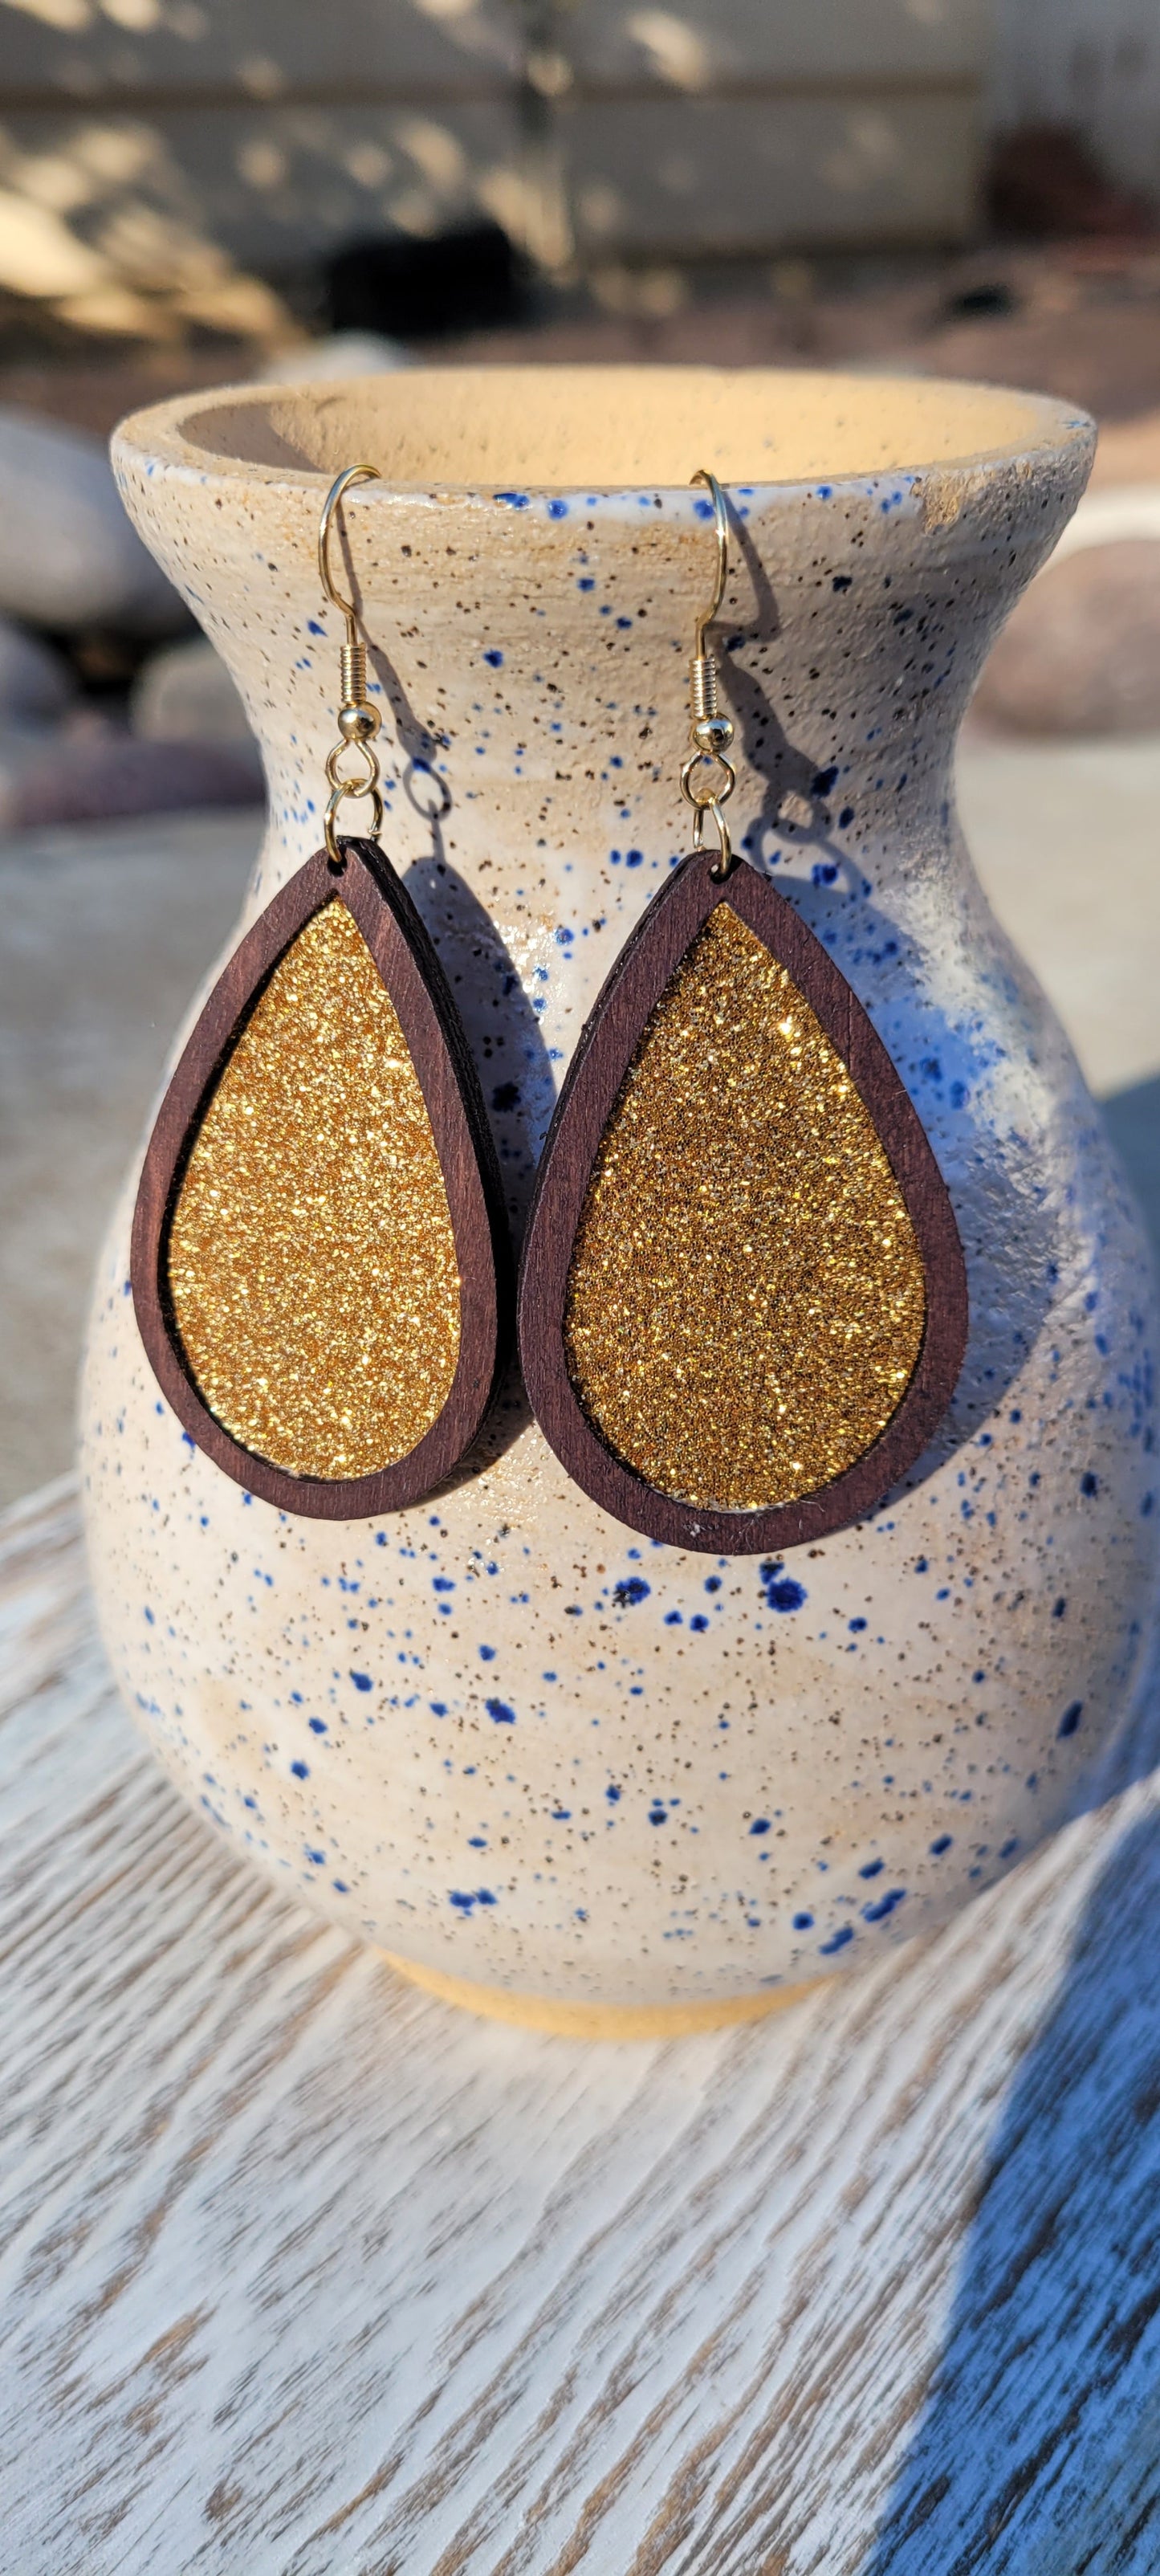 Dark brown wood Gold glitter Teardrop shape Brushed gold fish hook dangle earrings Rubber earring back Drop length 2”, width 1.33” Whether you want to be on the wild side or classy this earring set it will add a fun touch to your outfit